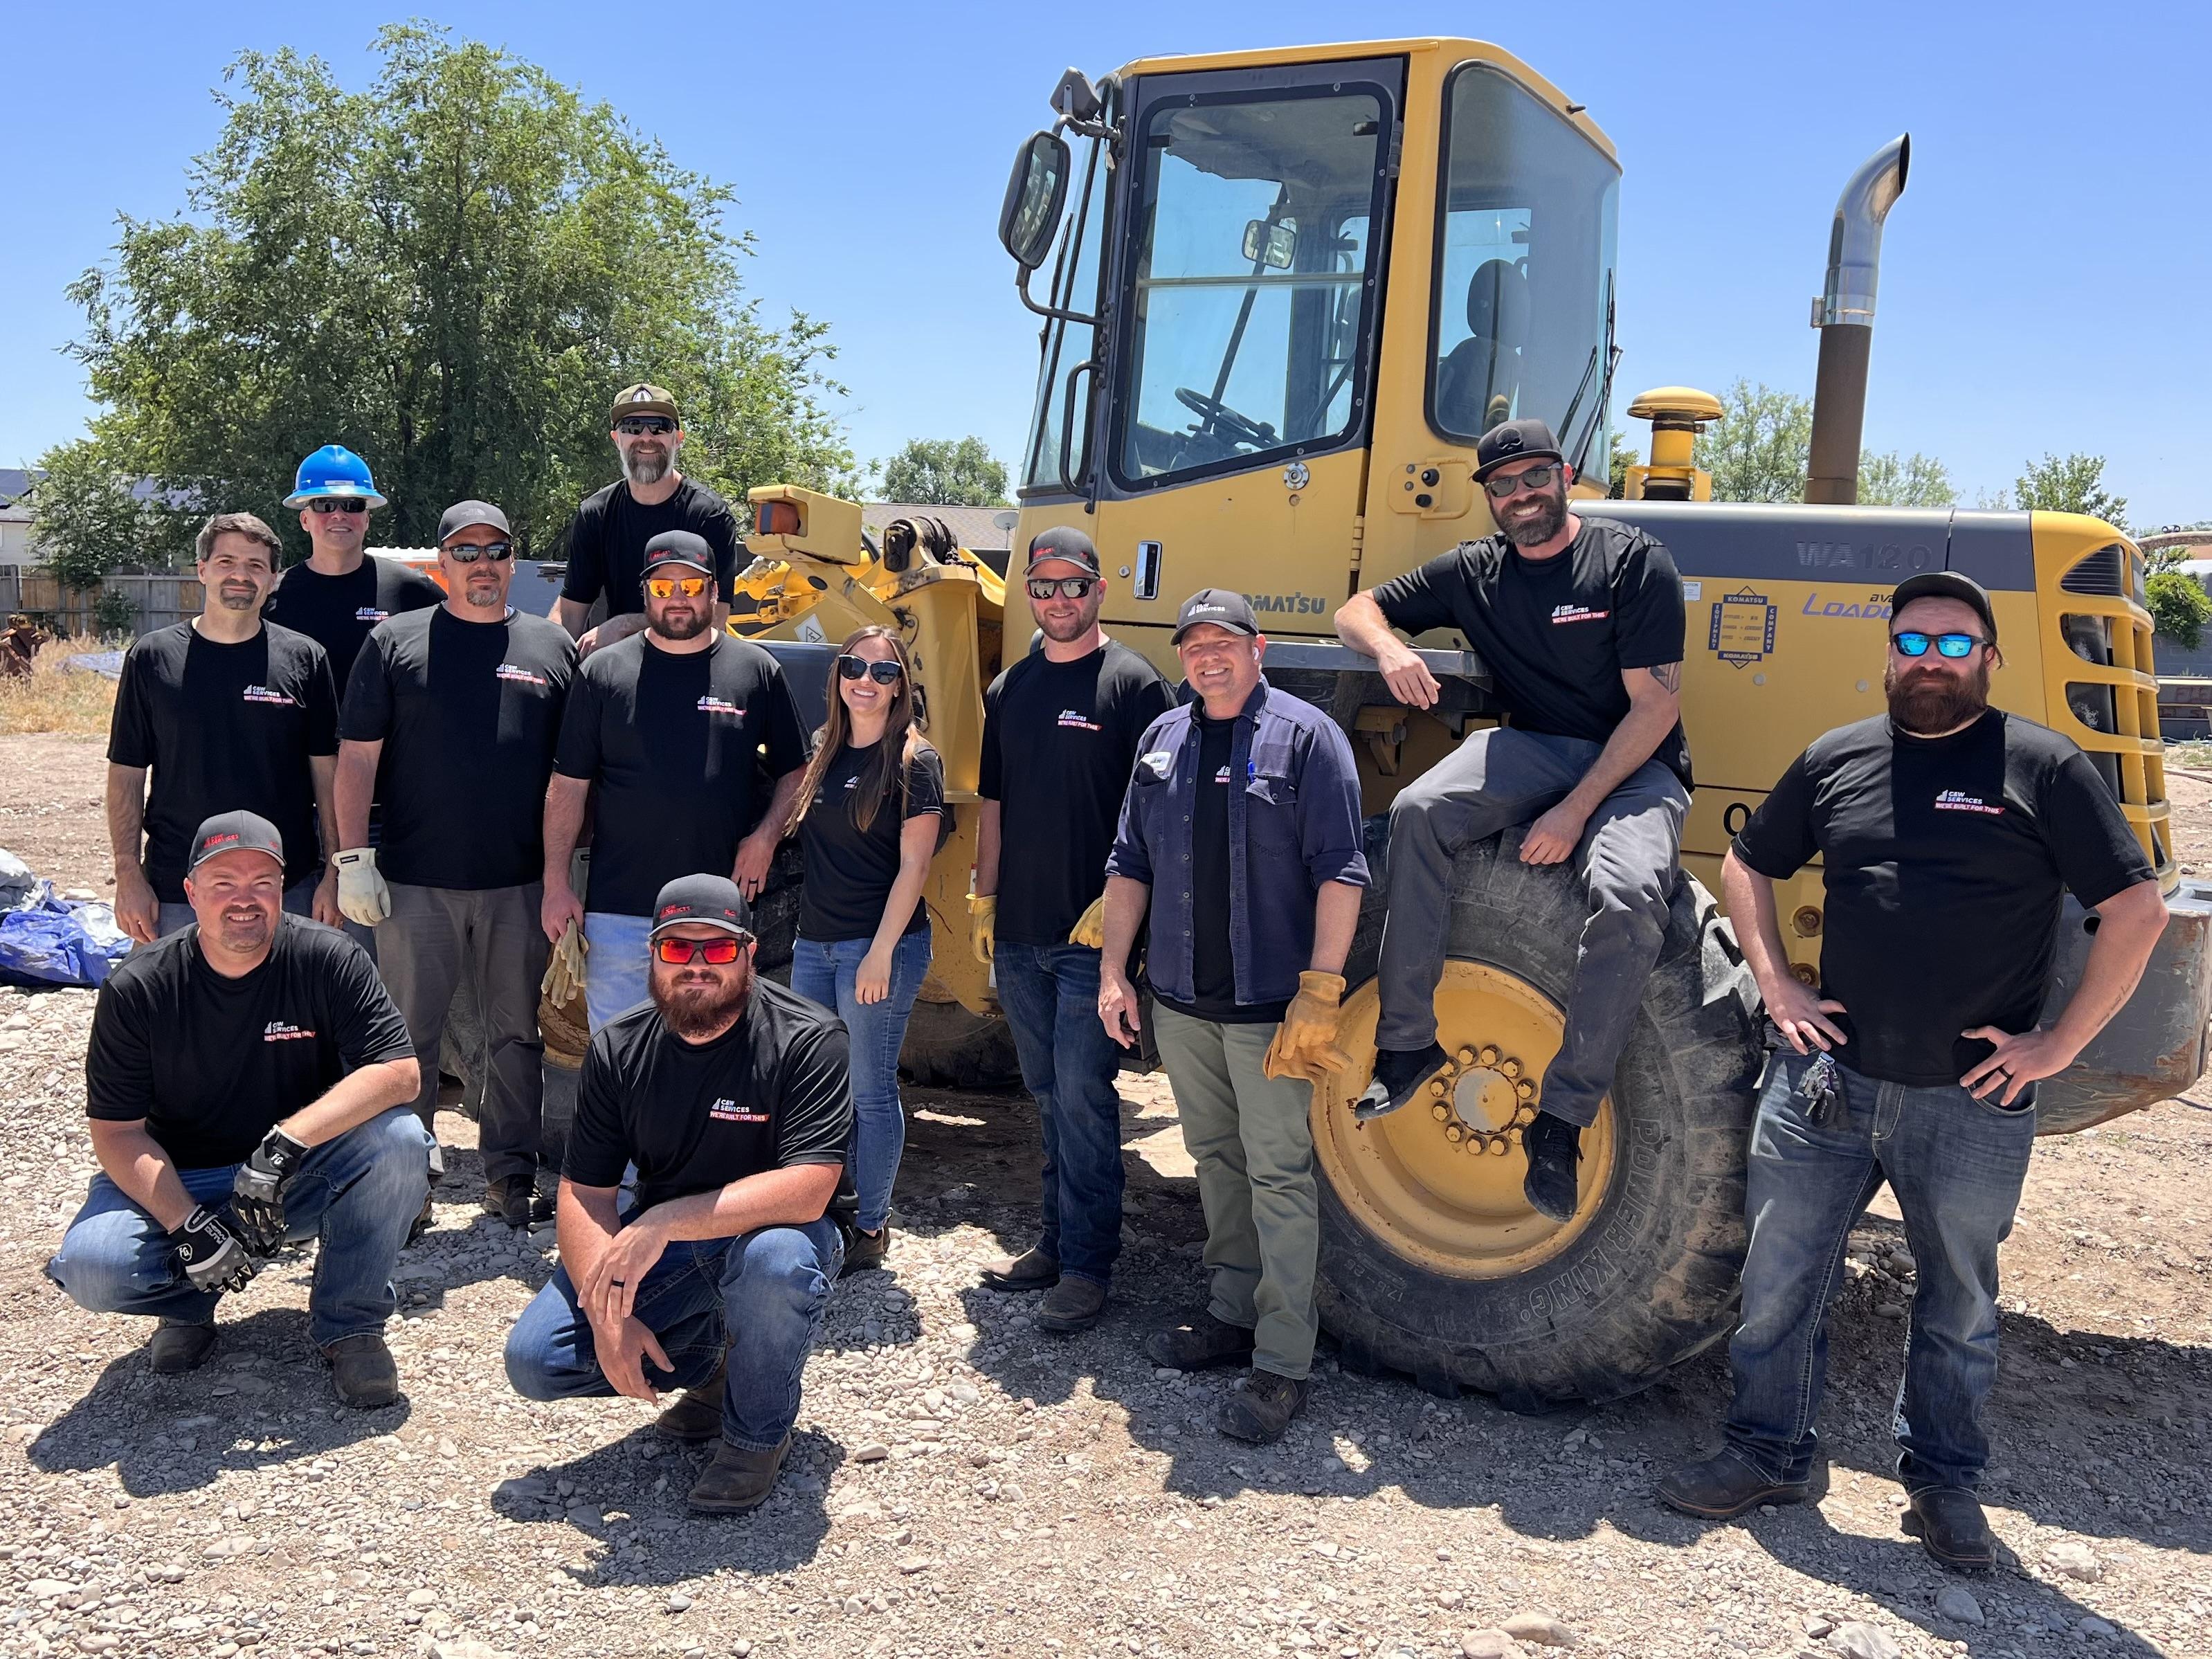 (Pictured from left to right) Back row: Dan Cahill, Bryan West, Chris Harrison, David Miles, Seth Hankins, Liz Nenni, Travis Smith, Dustin Walker, James Smith, and Charles Wilson. Then in front there’s Front row: Eric Cannon and Brad Batronis.